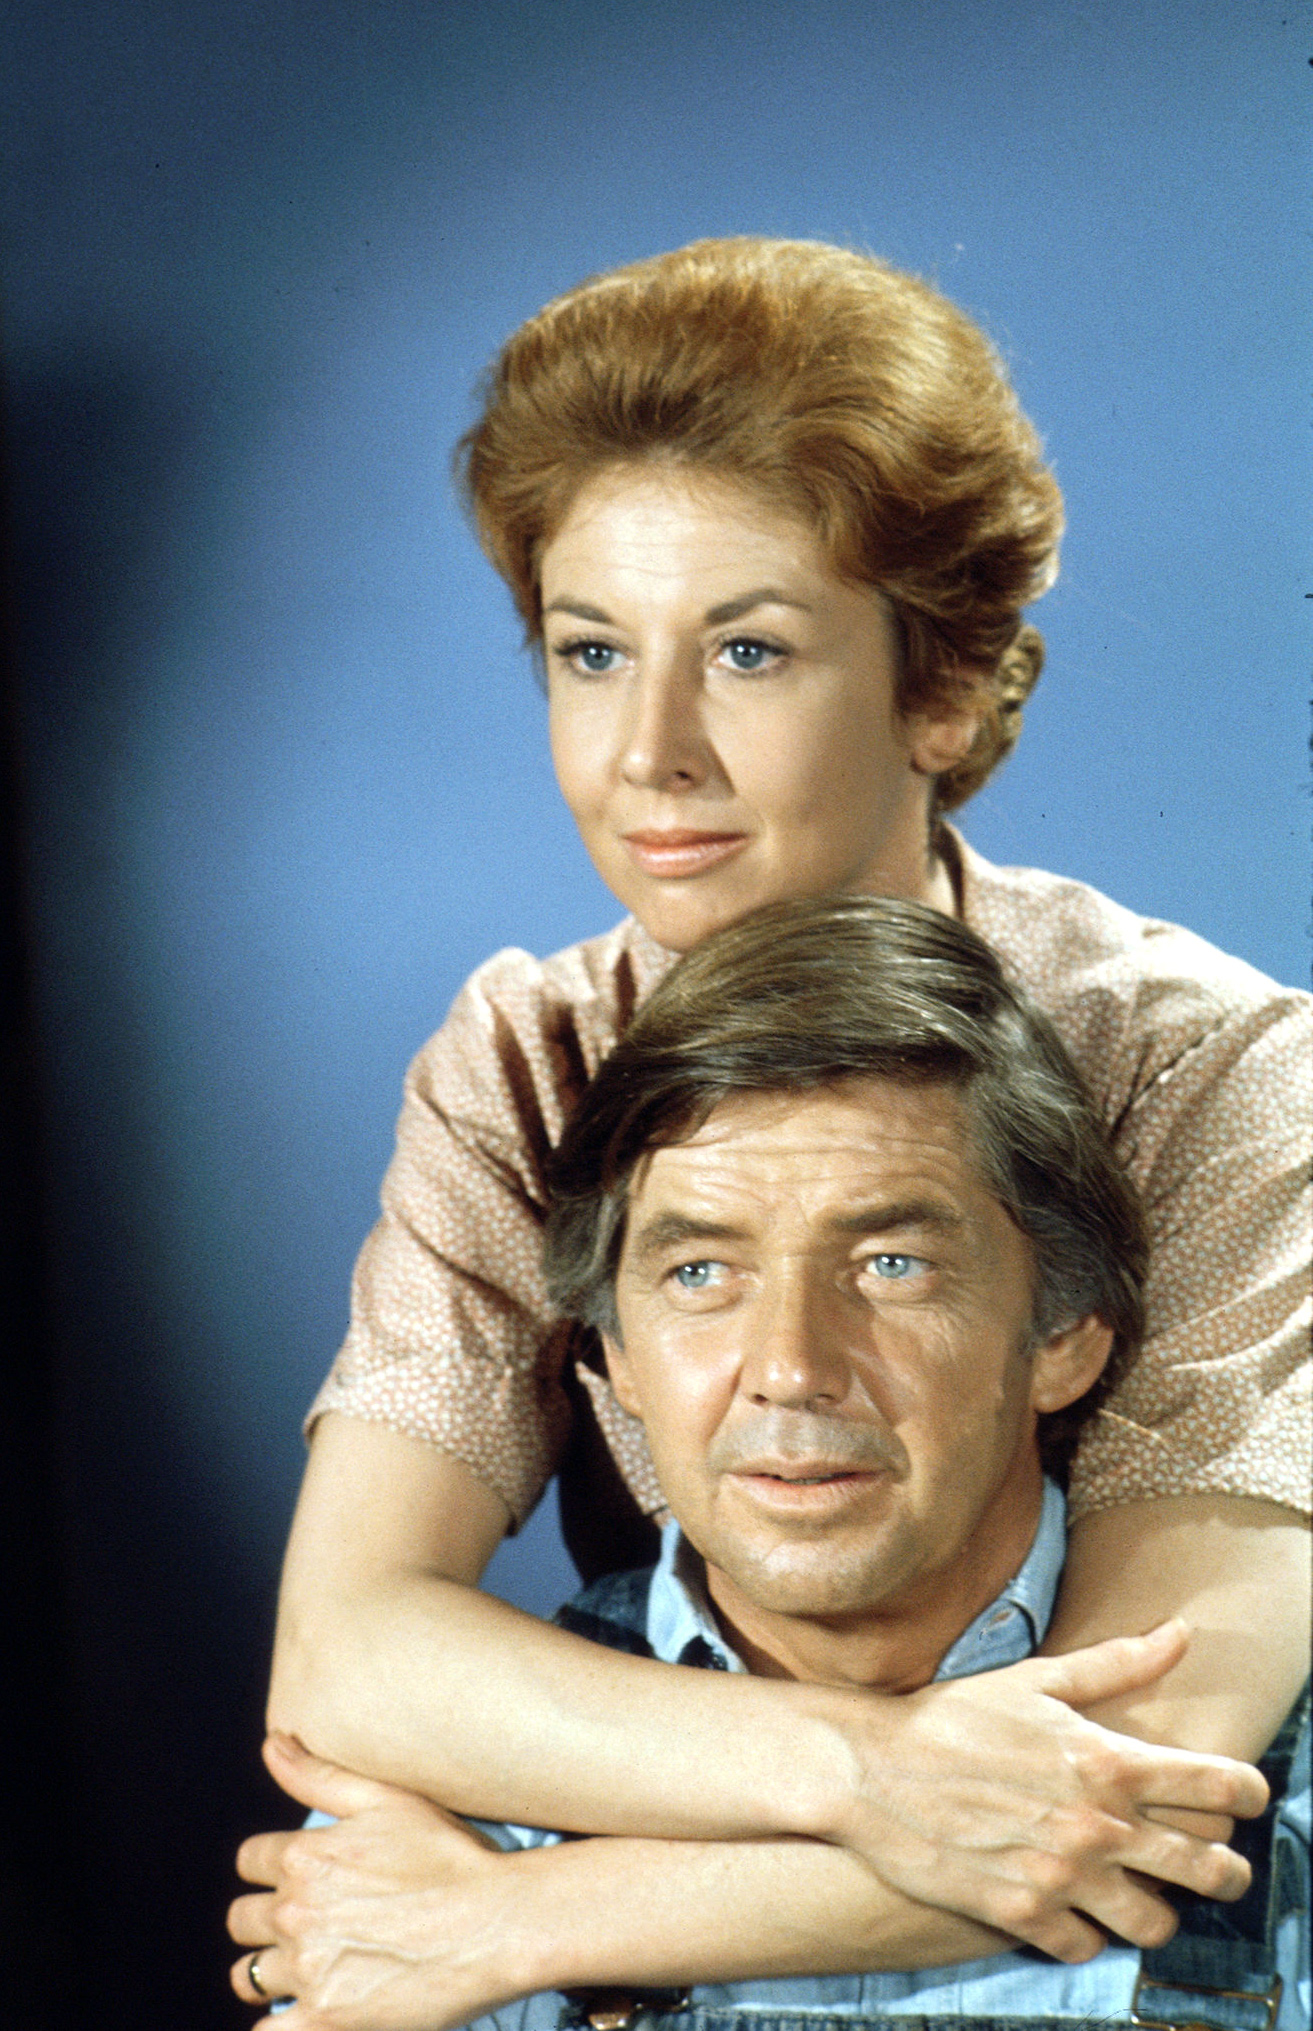 Michael Learned and Ralph Waite in "The Waltons," on January 1, 1974 | Source: Getty Images